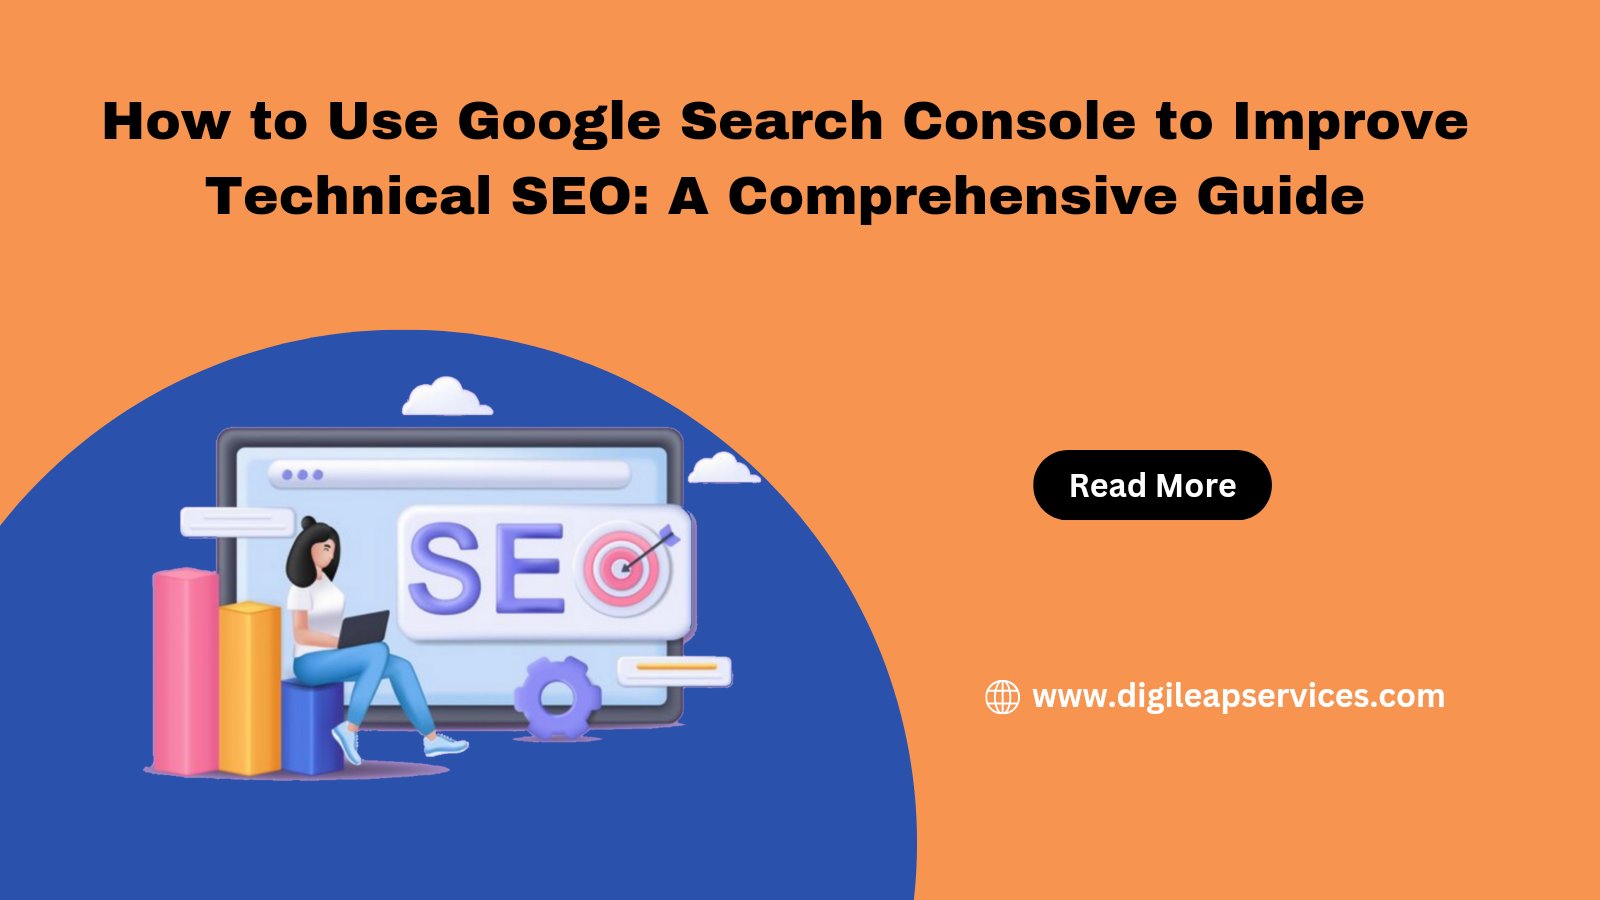 How to use Google Search Console to Improve SEO